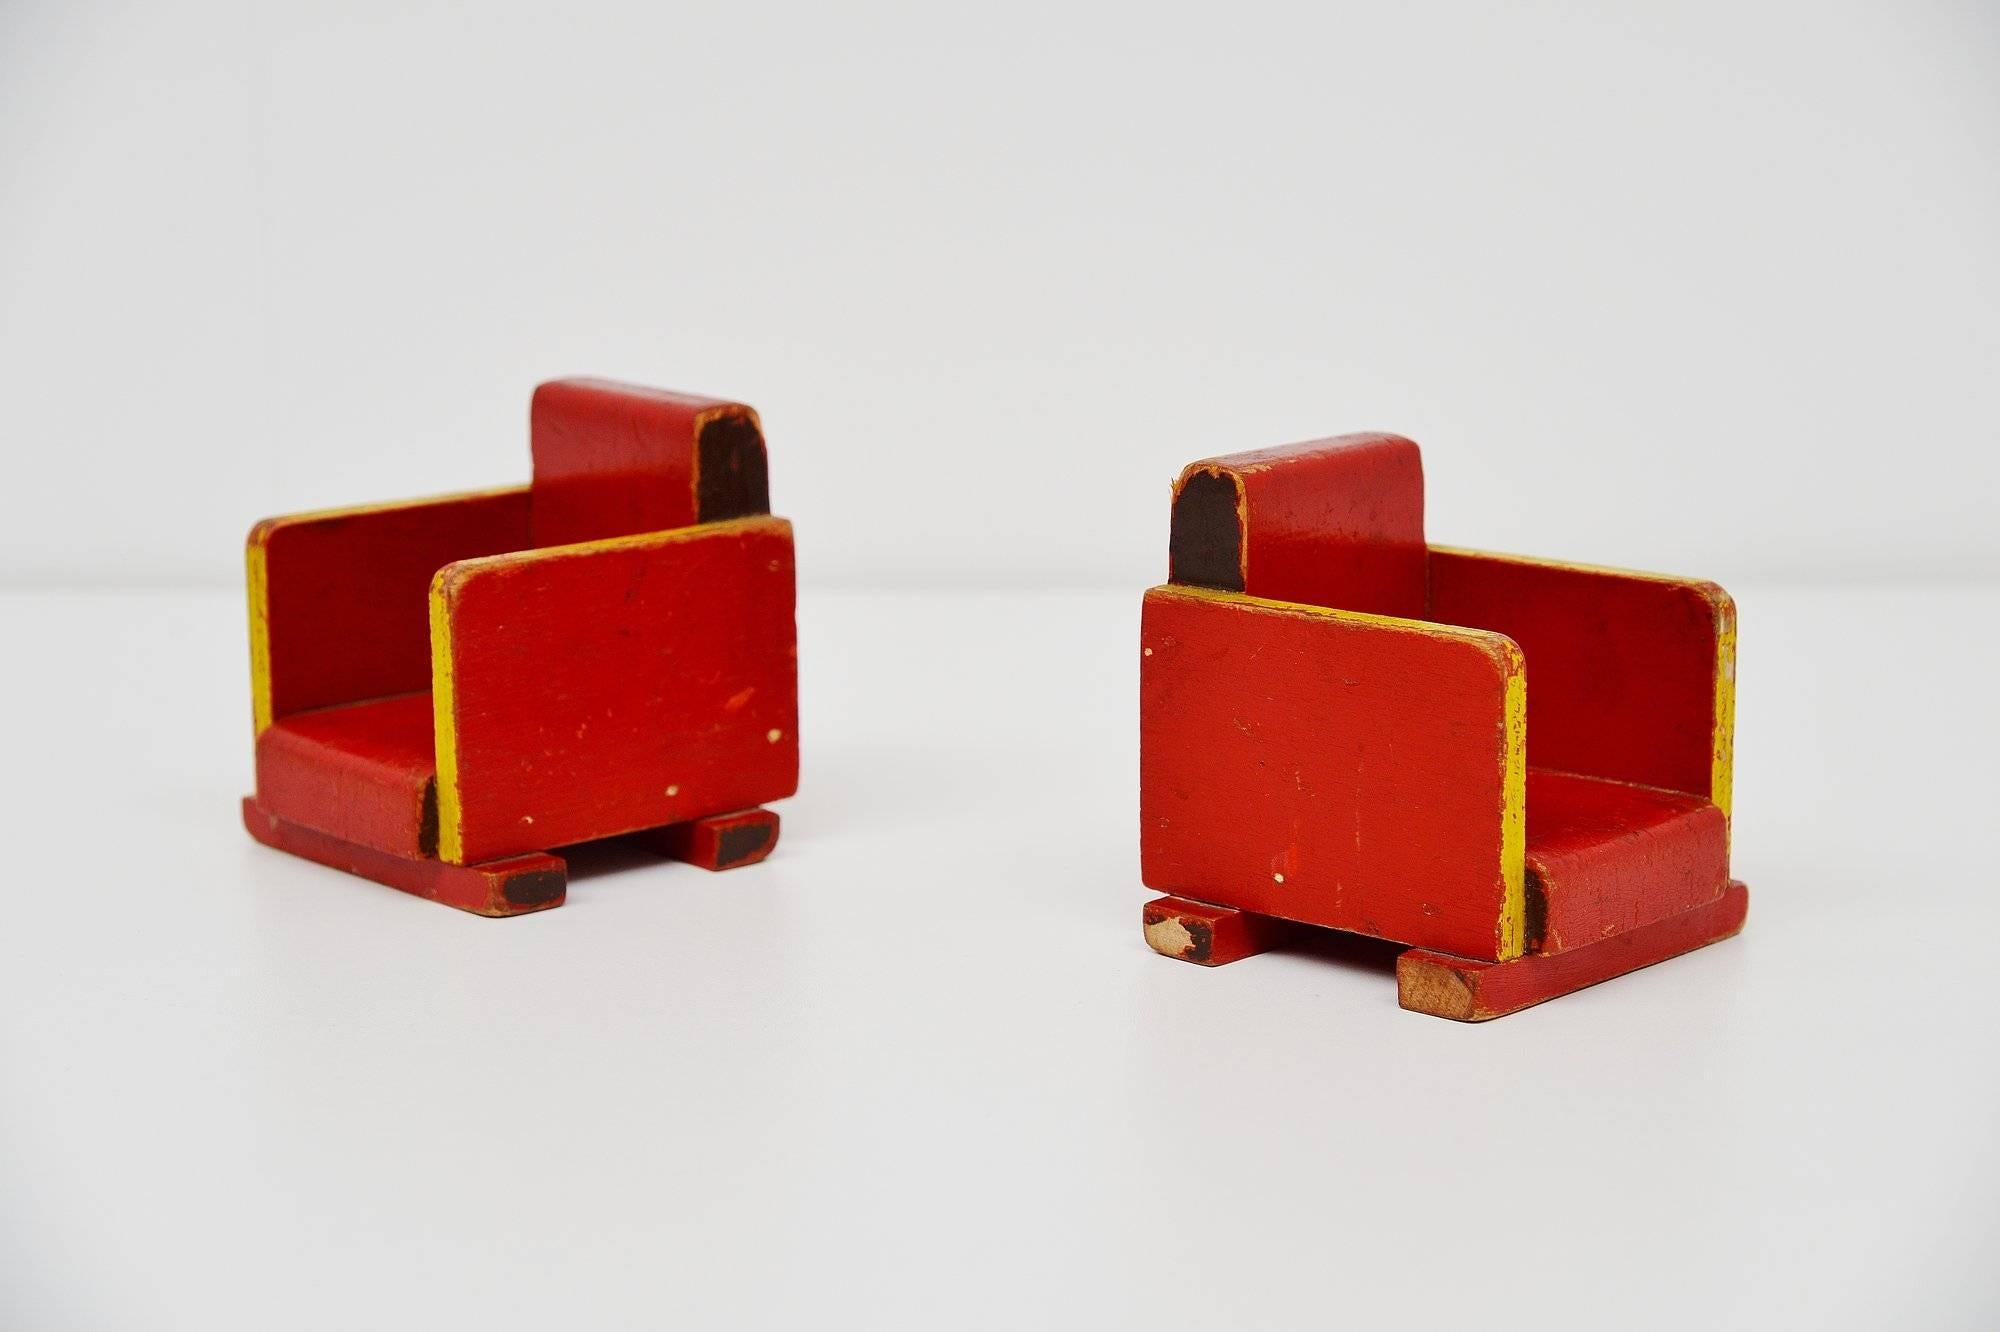 Very nice pair of small toy chairs Model 667 designed by Ko Verzuu for Ado Holland in 1939. Ado means Arbeid door onvolwaardigen, translated; labor by incapacitated, which makes this an even more special piece. Toys by Ado are being highly collected